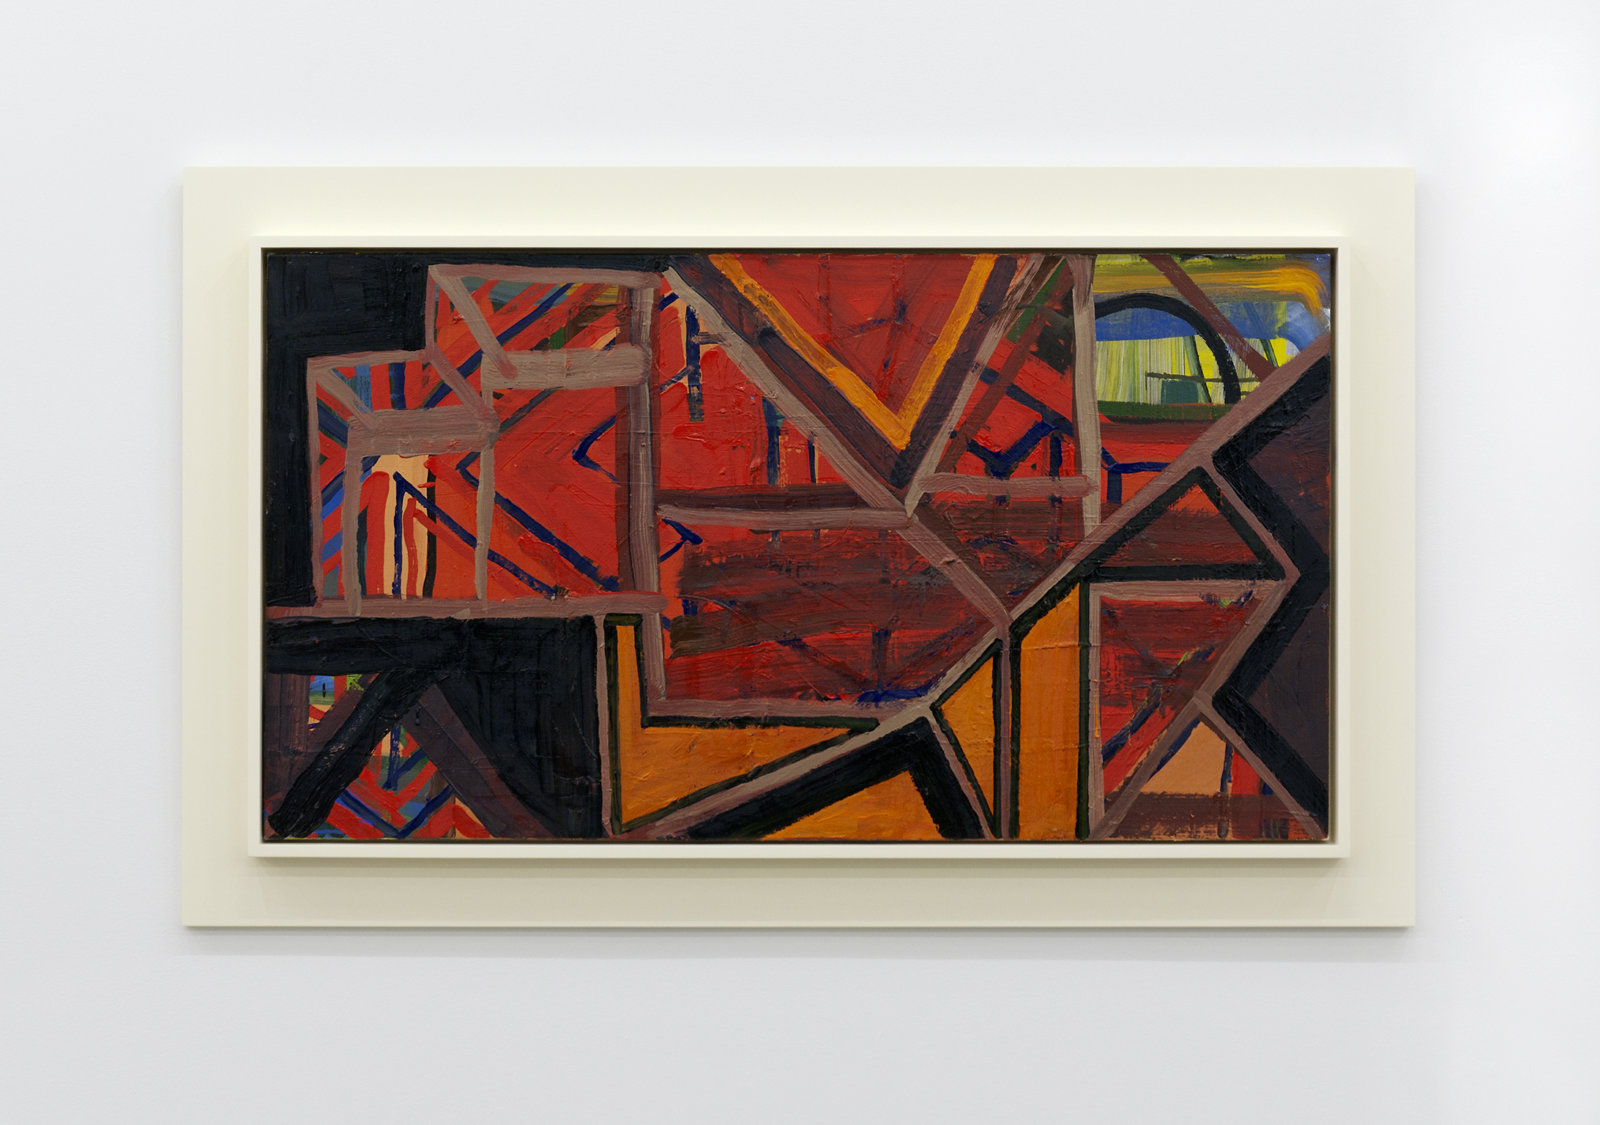 Damian Moppett, Horizontal Abstraction, 2010, oil on canvas and wood frame, 32 x 52 in. (80 x 132 cm)